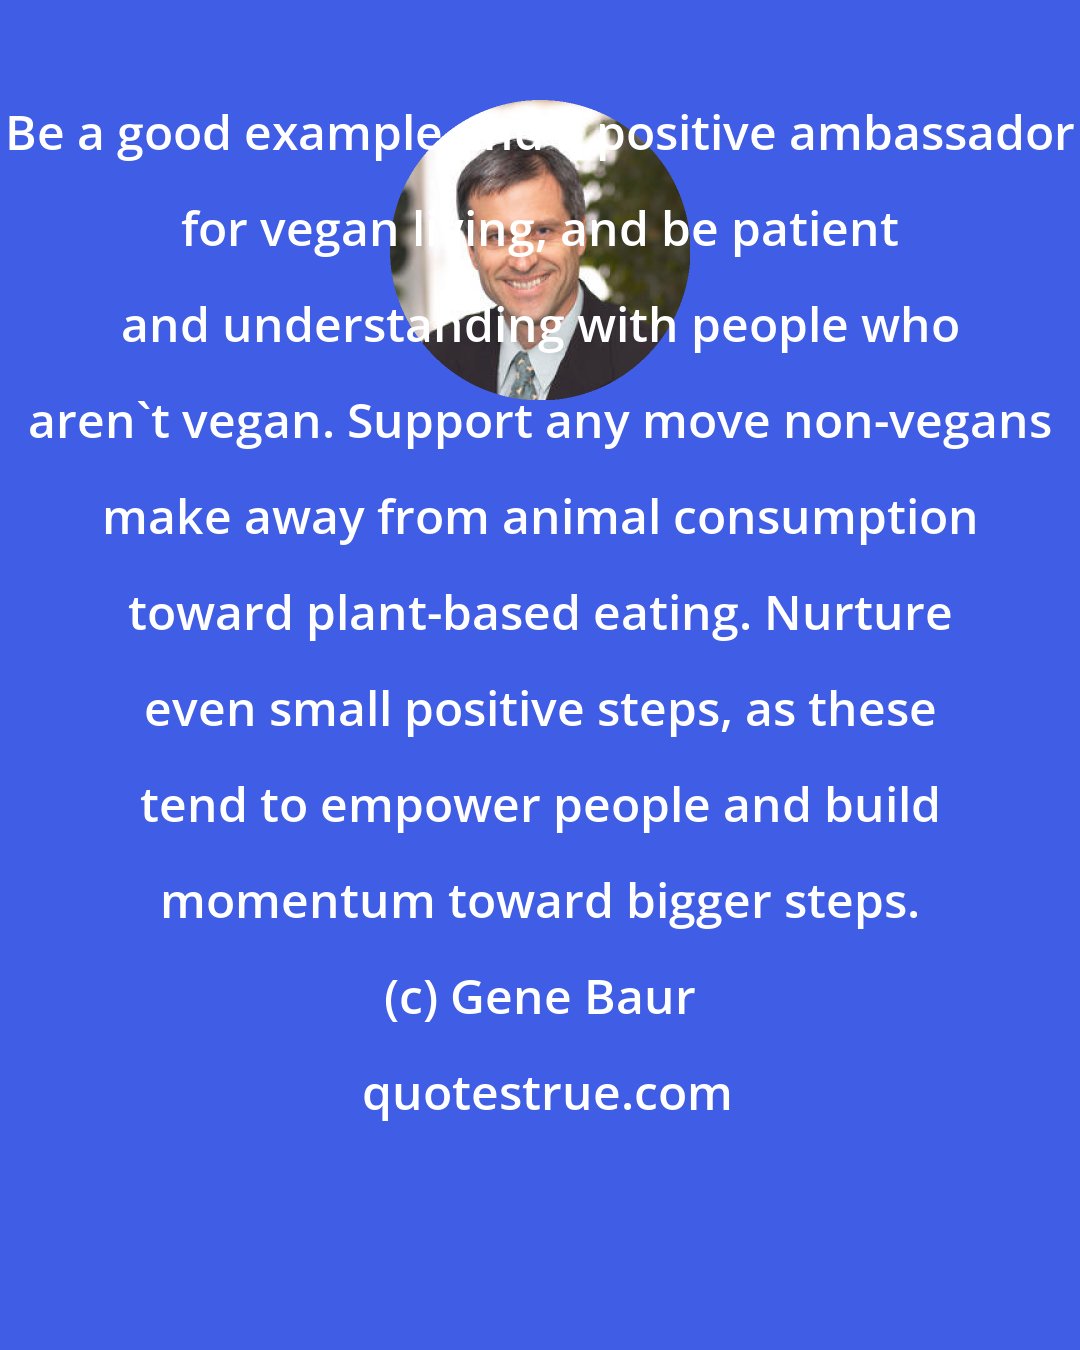 Gene Baur: Be a good example and a positive ambassador for vegan living, and be patient and understanding with people who aren't vegan. Support any move non-vegans make away from animal consumption toward plant-based eating. Nurture even small positive steps, as these tend to empower people and build momentum toward bigger steps.